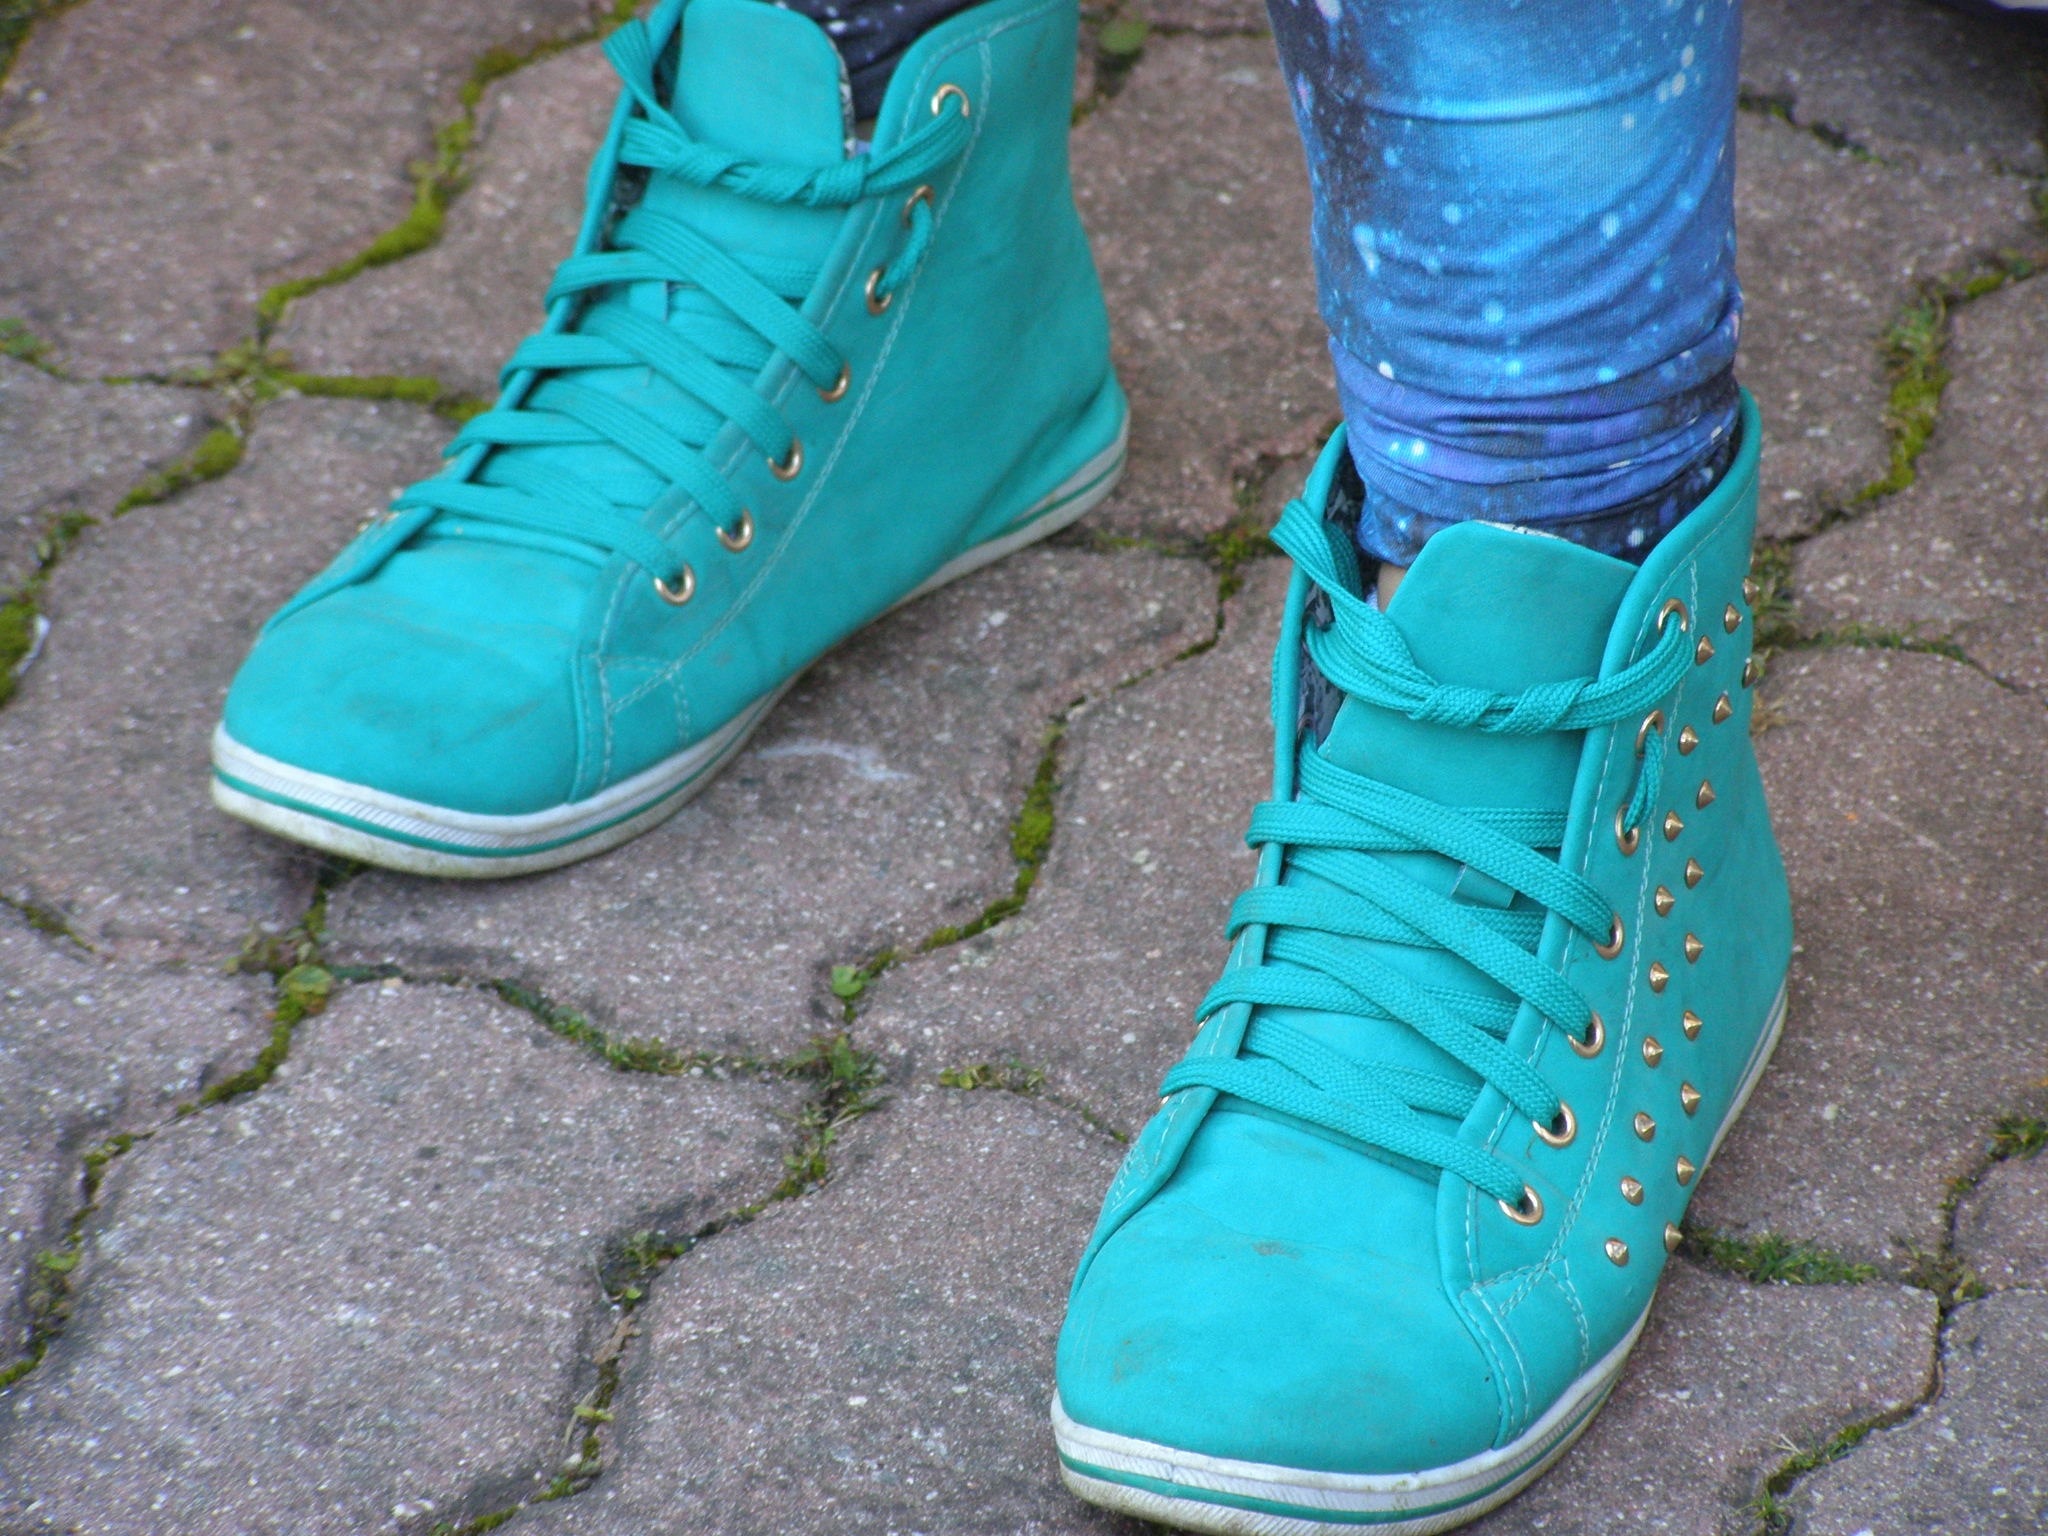 pair of teal high top sneakers with gold spike studs on human feet